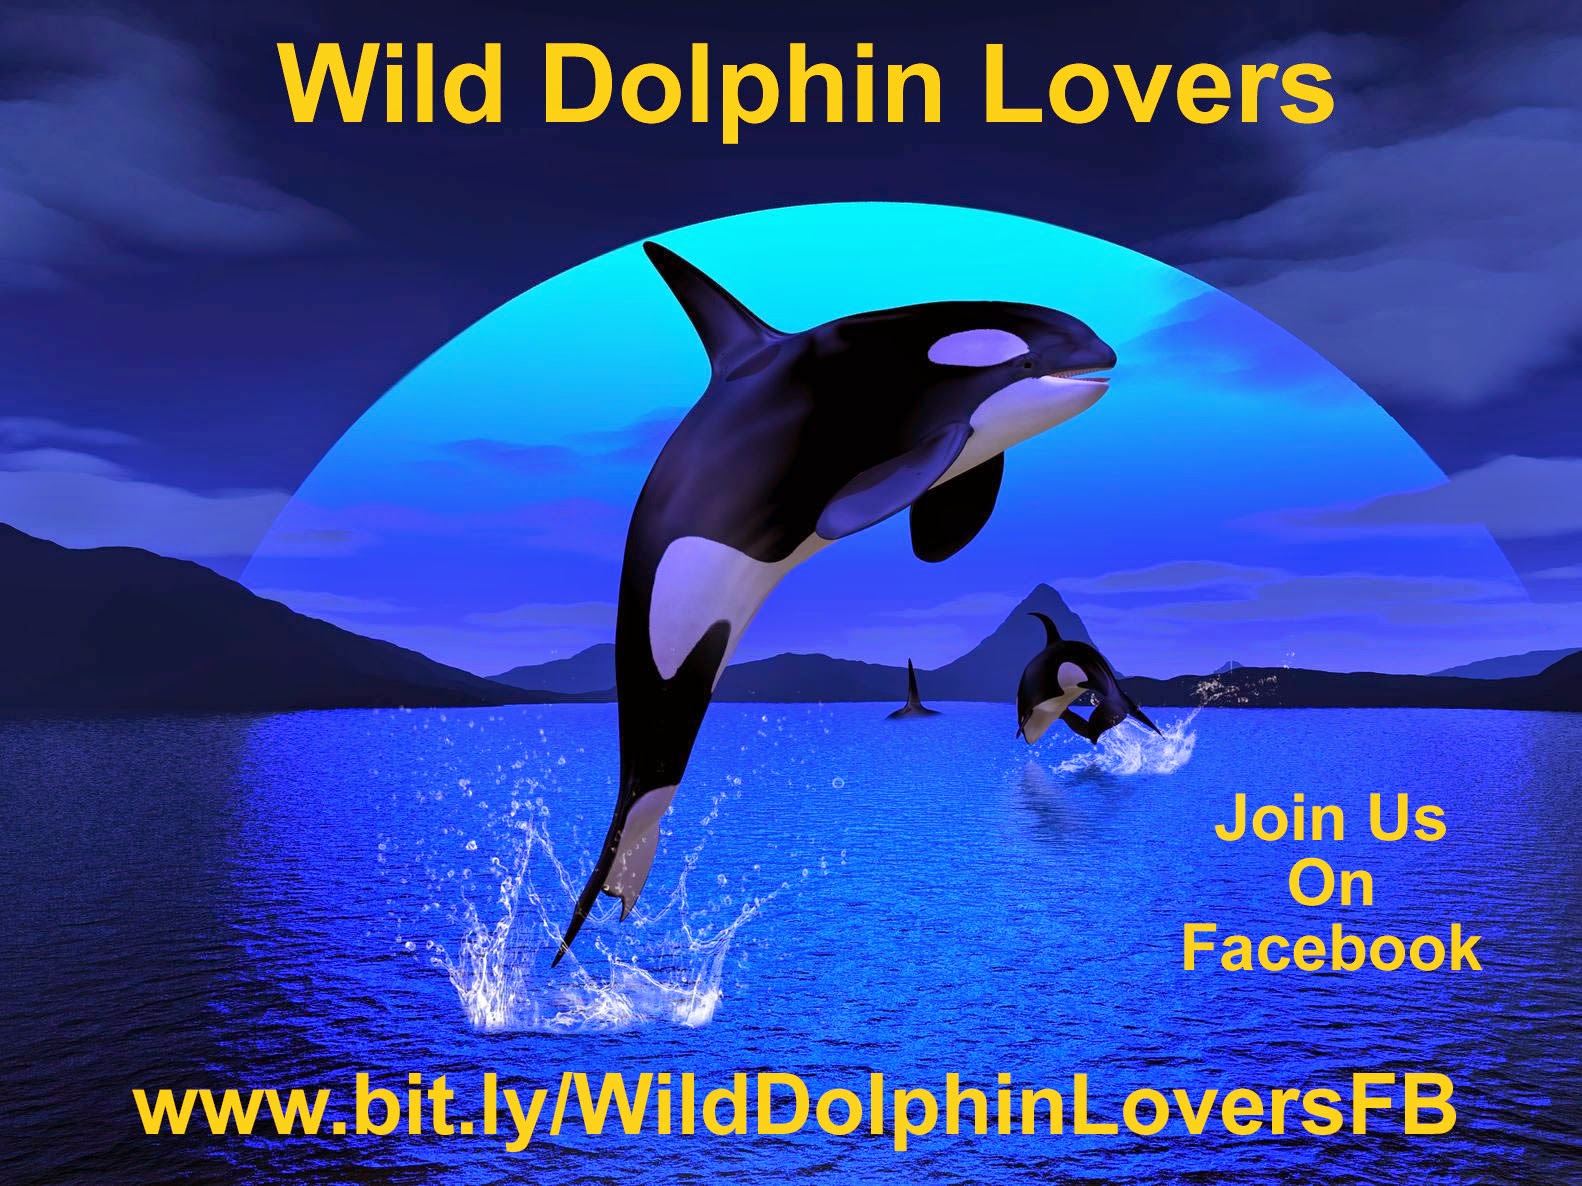 Wild Dolphin Lovers FB Group